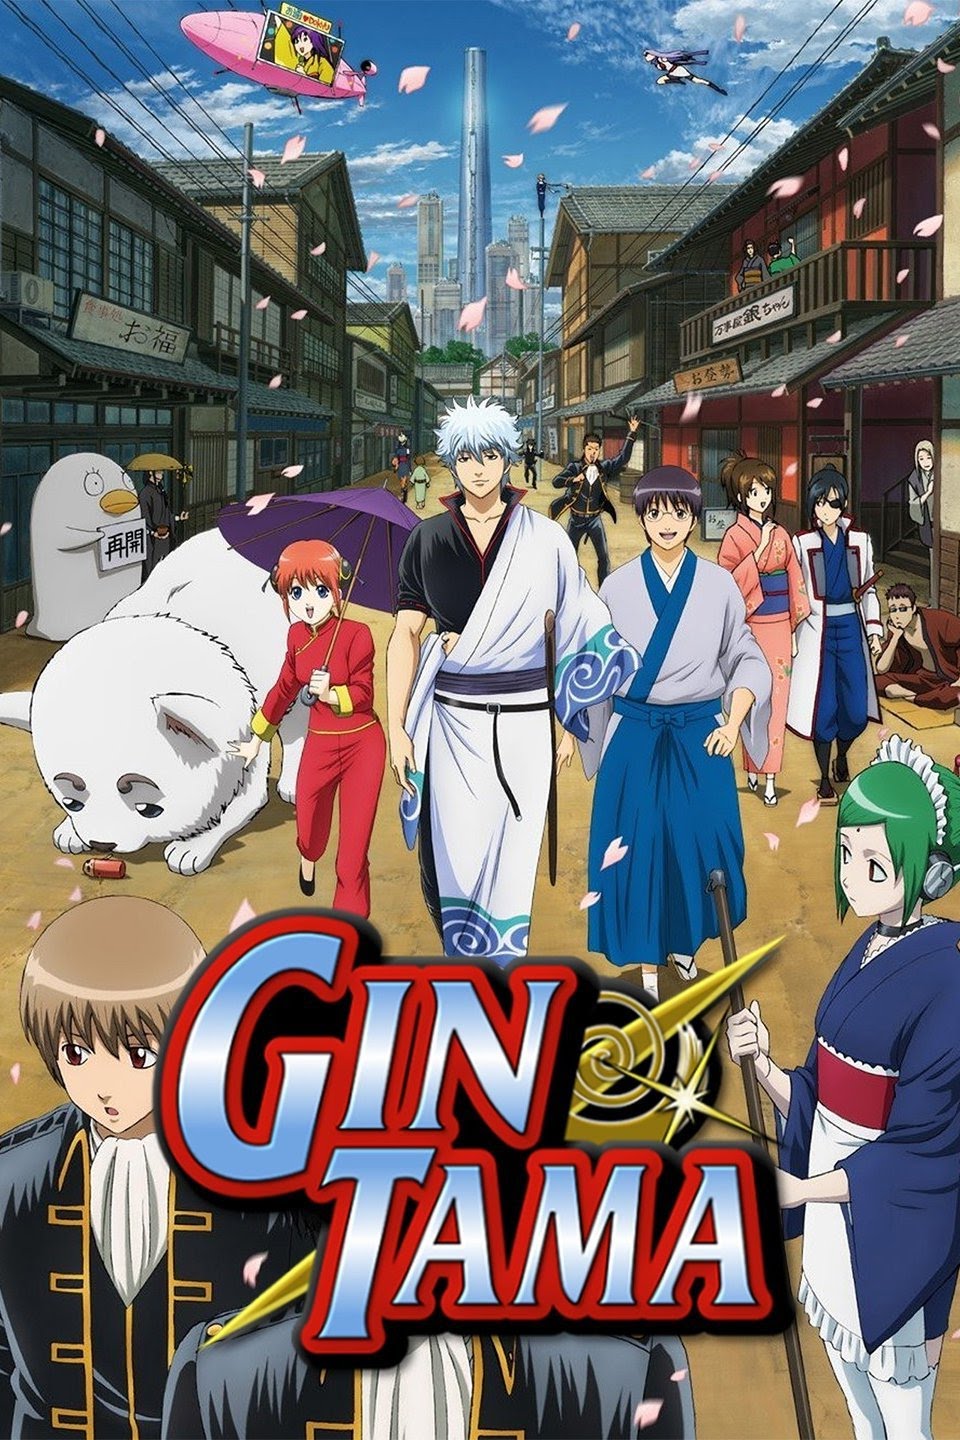 Gintama Anime Series Download [S01-S010+Movies+OVAs] - Eng Dub / Subbed - 1080p (Completed)